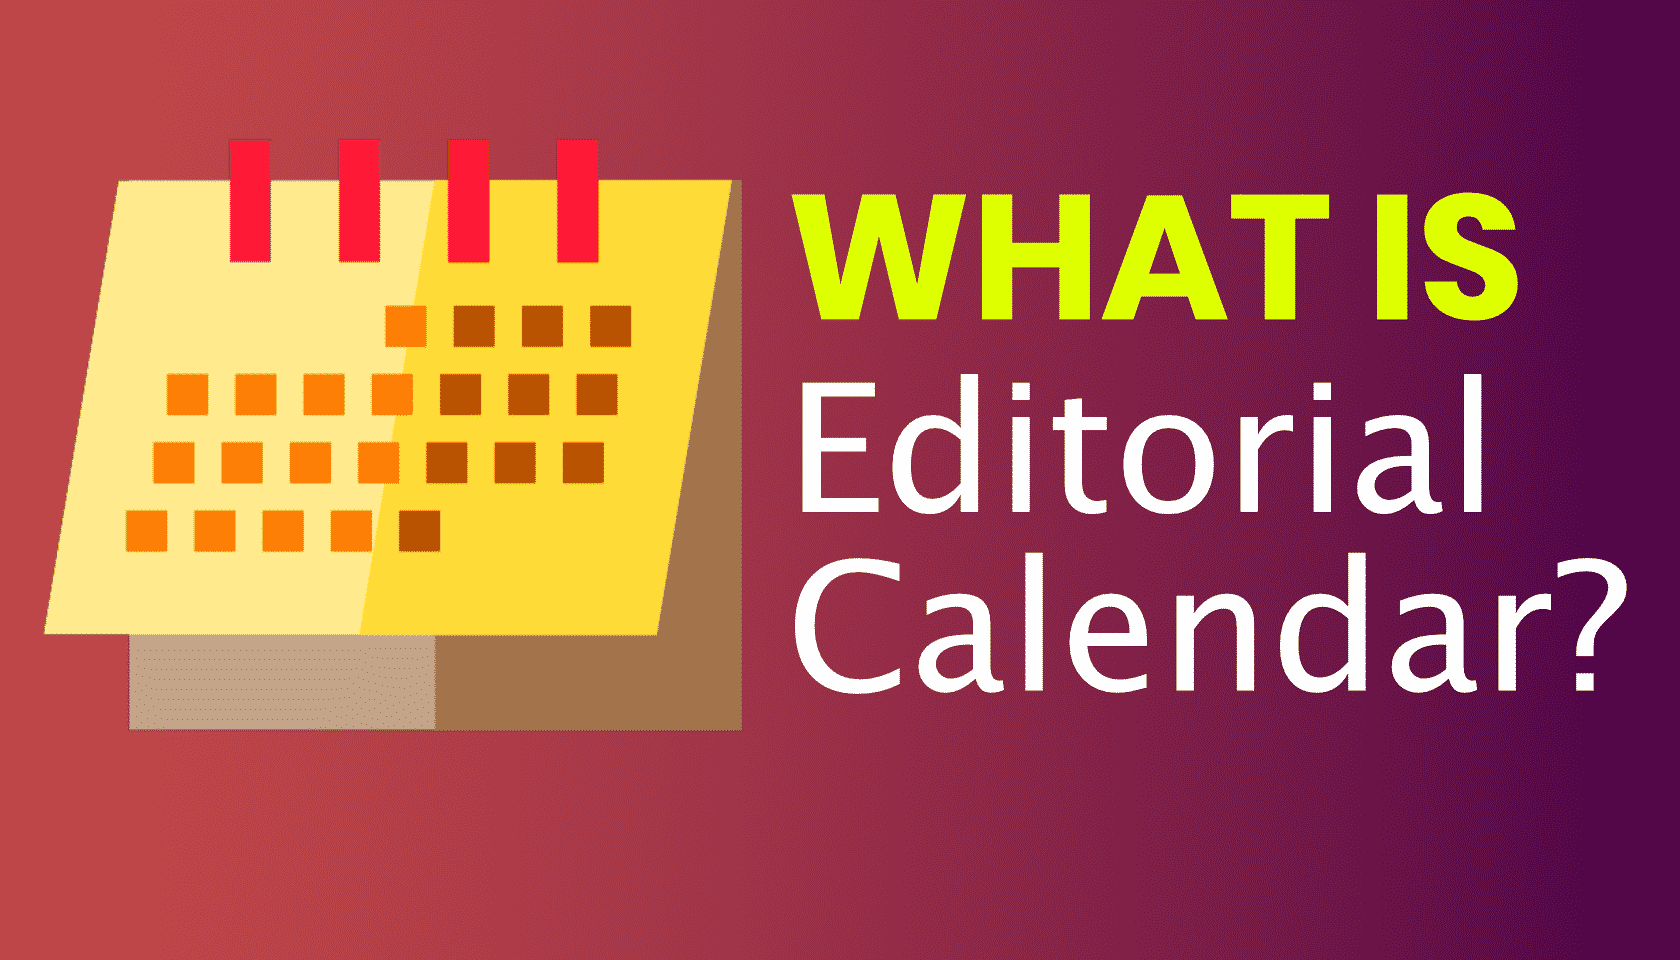 What is: Editorial Calendar